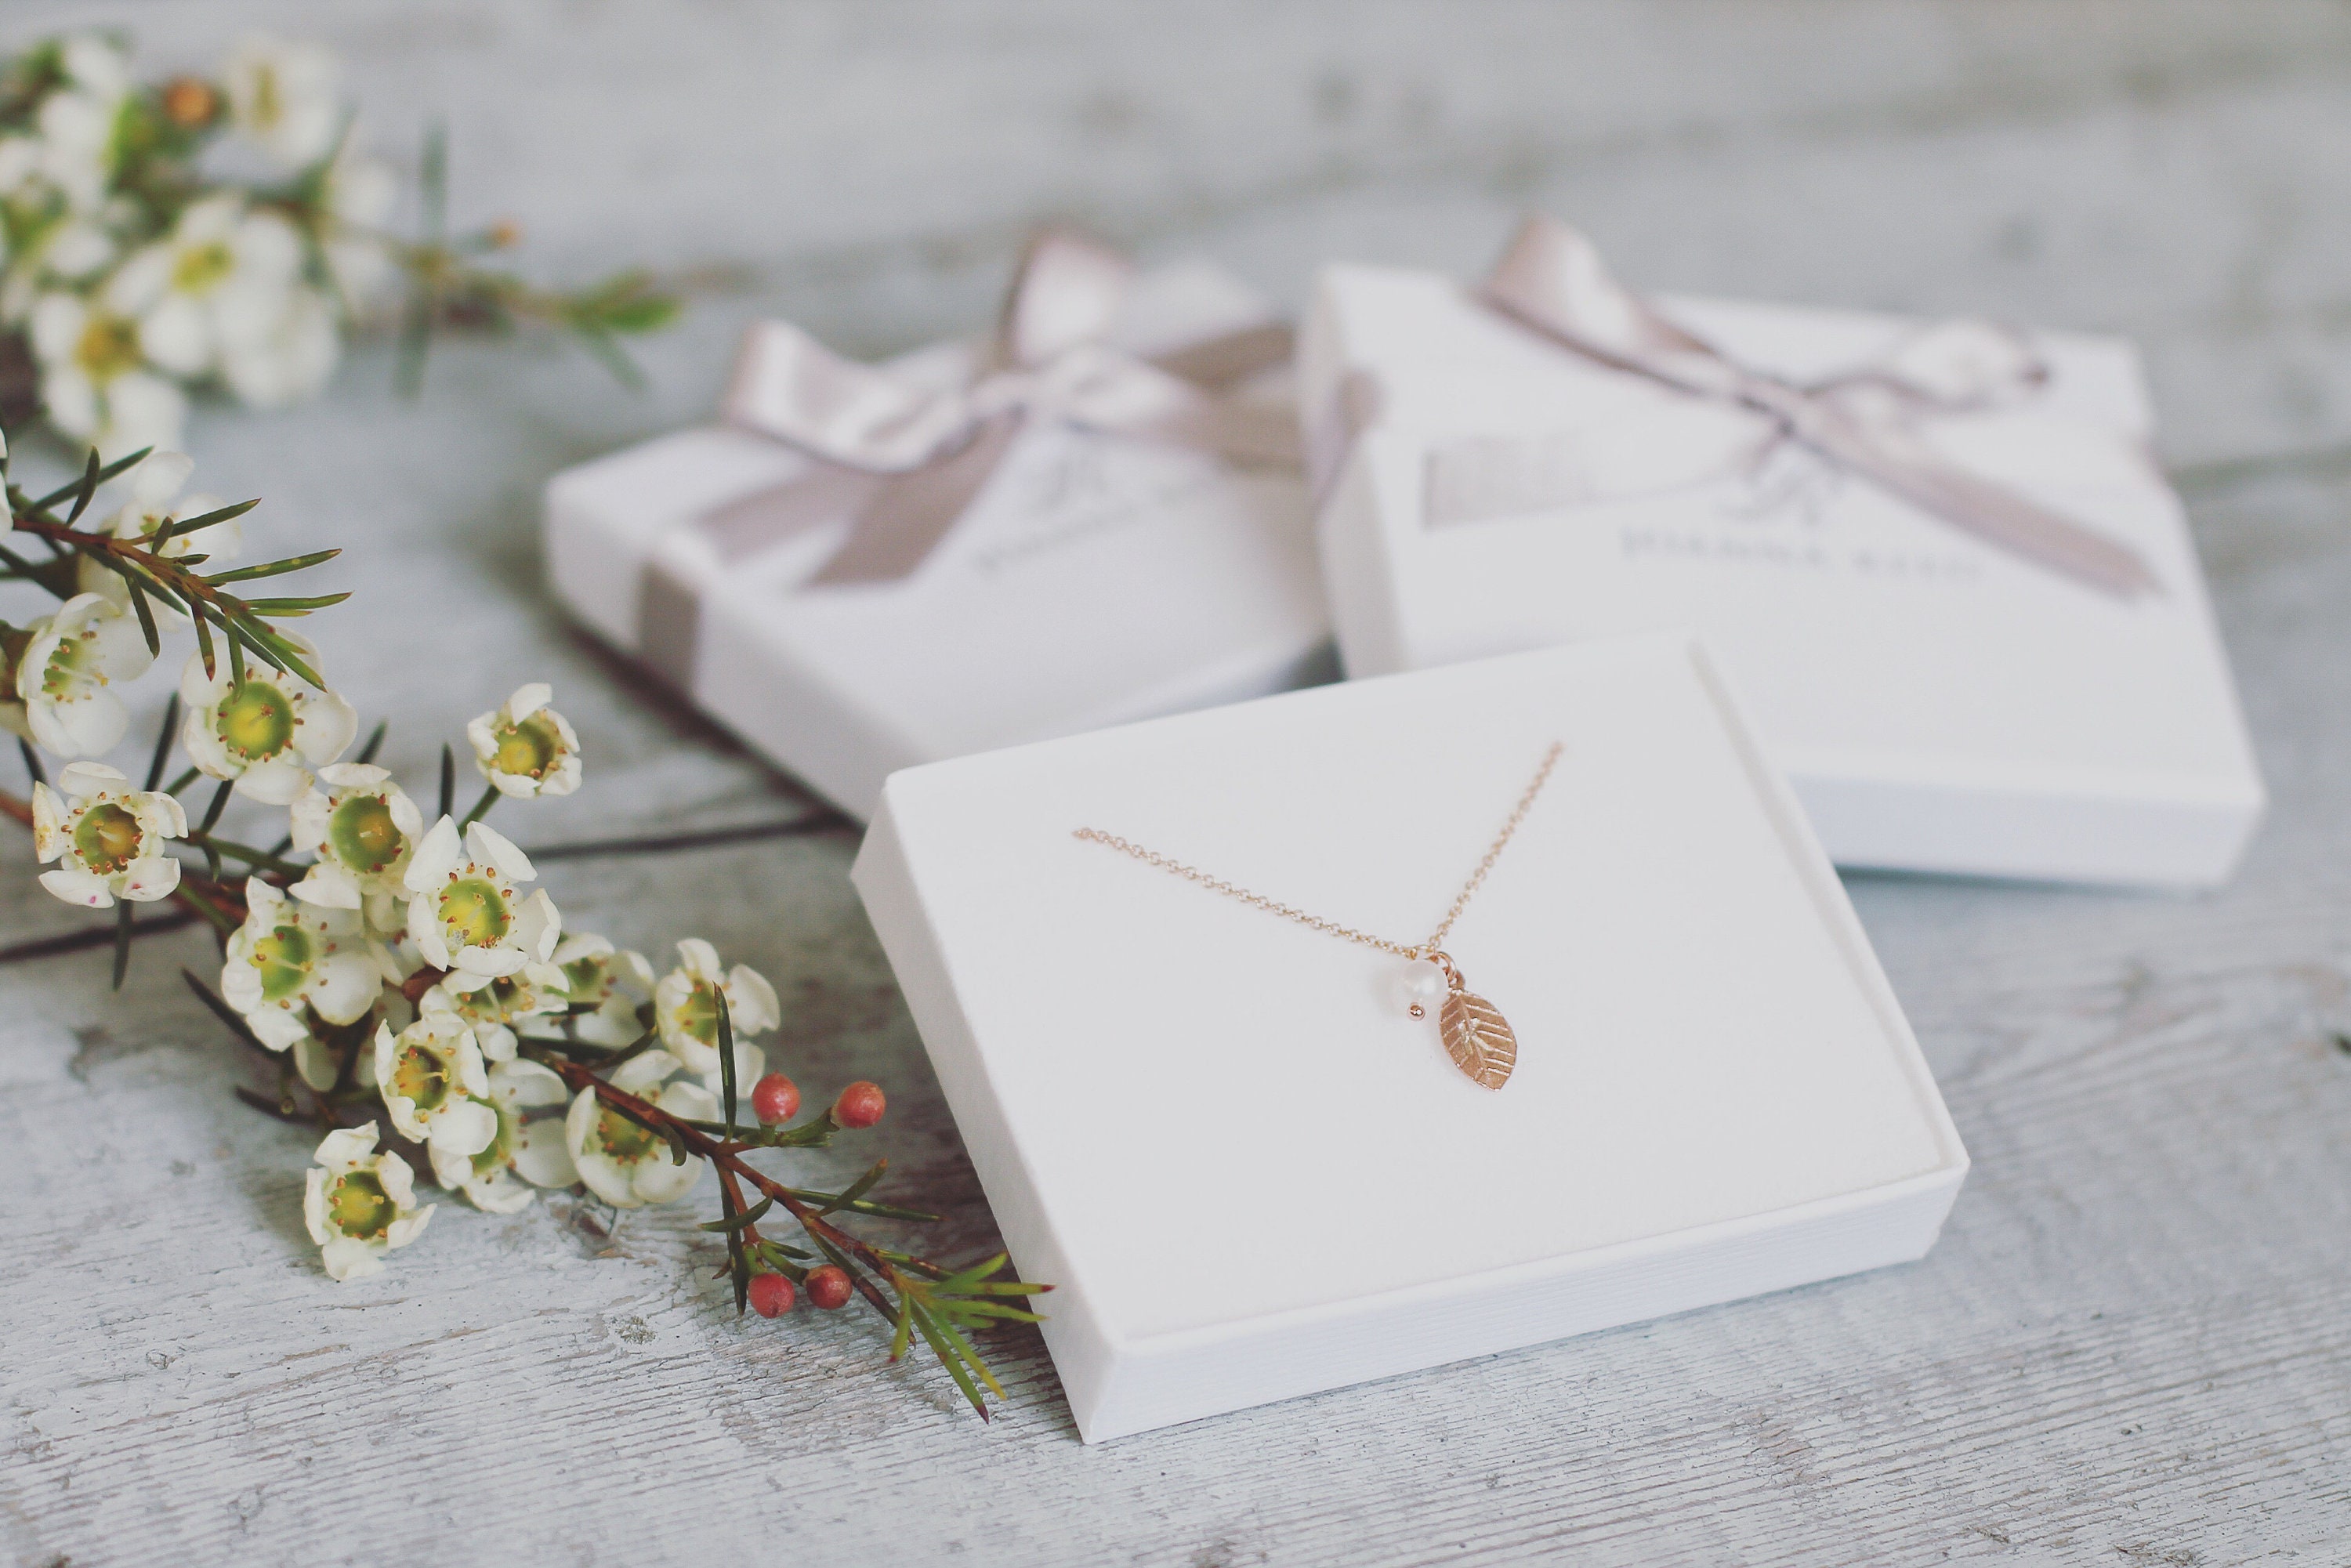 Personalized bridesmaid necklace rose gold leaf necklace | Etsy